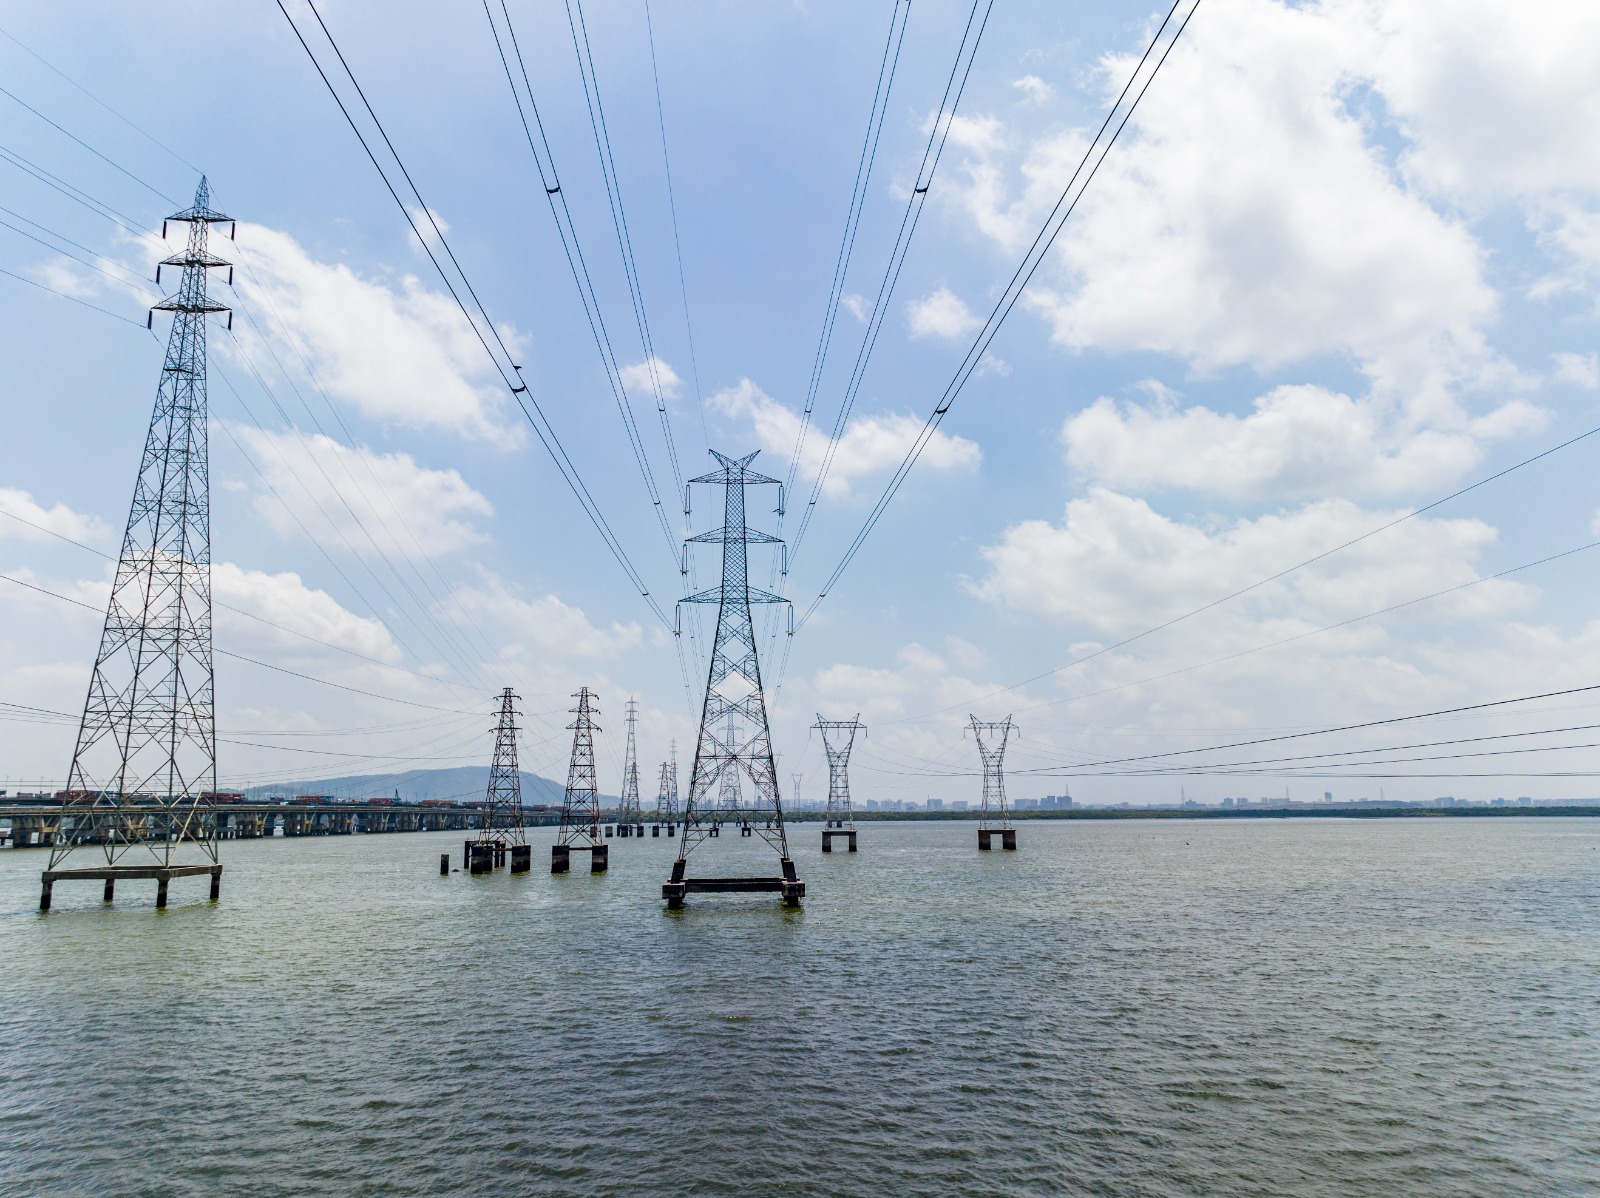 Mumbai is now 400 KV national grid Integrated